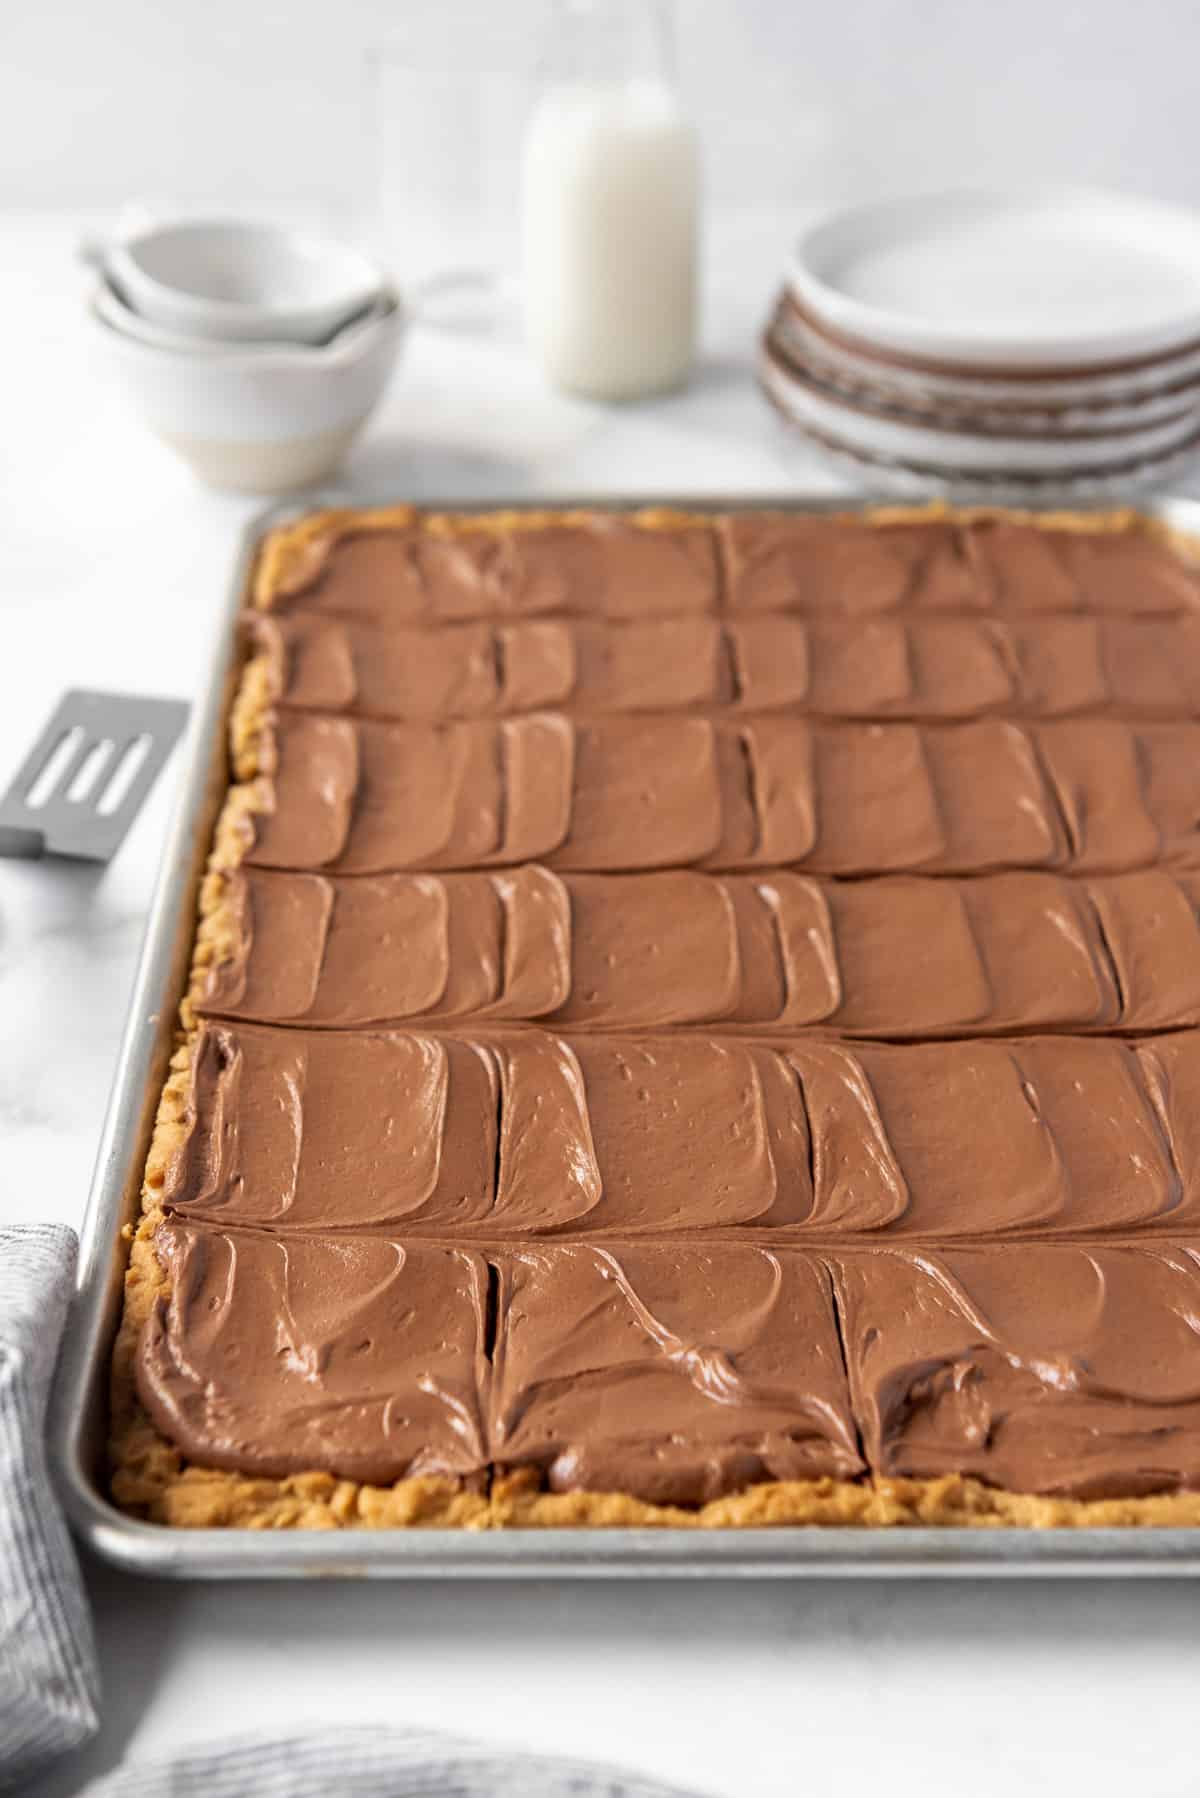 A try full of peanut butter oatmeal bars with chocolate frosting in front of a stack of plates and a glass of milk.